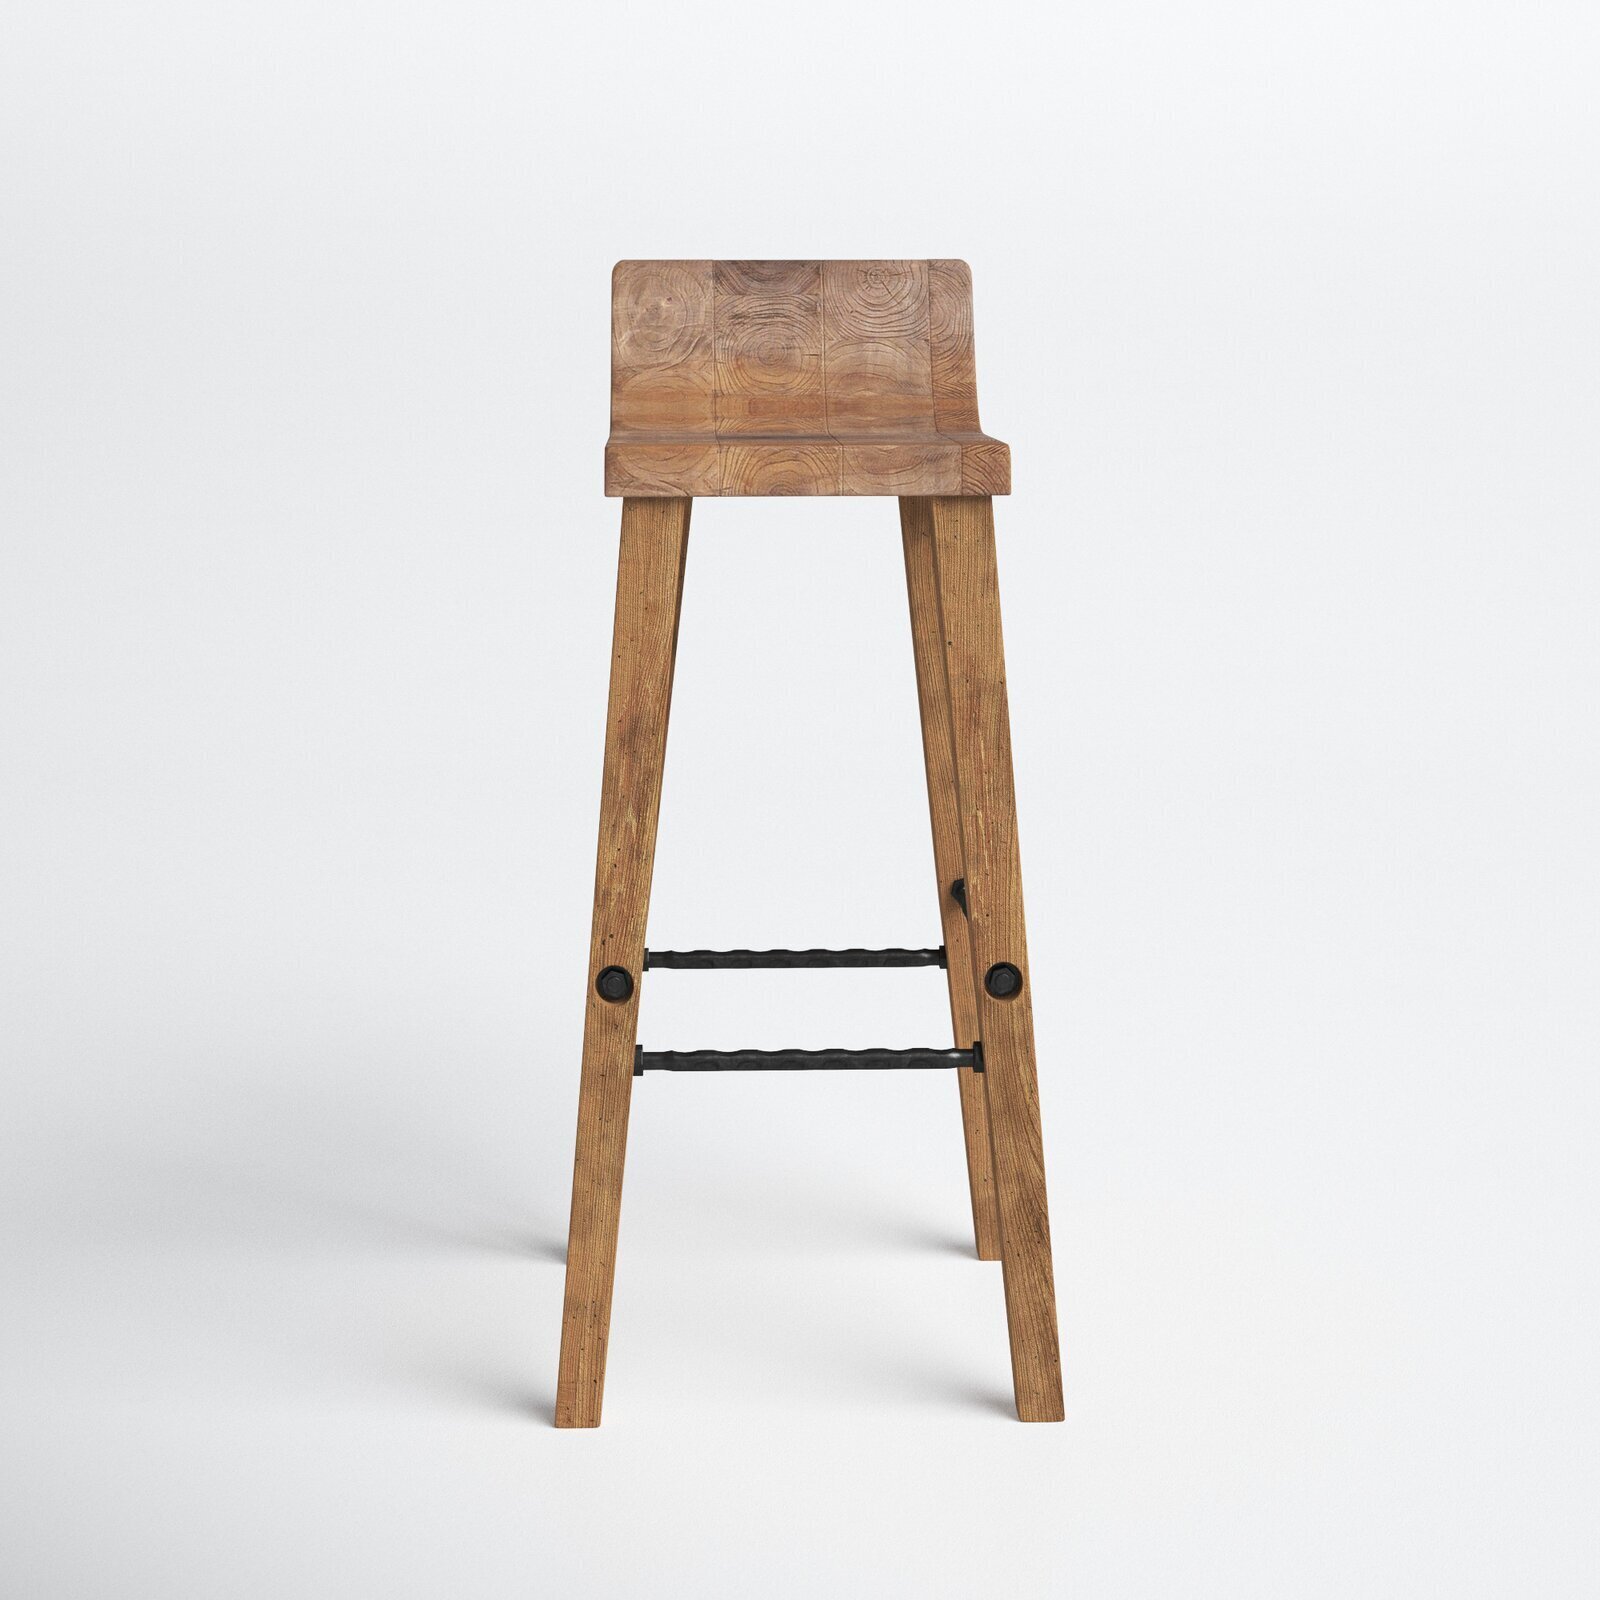 Low back wooden bar stool in rustic style